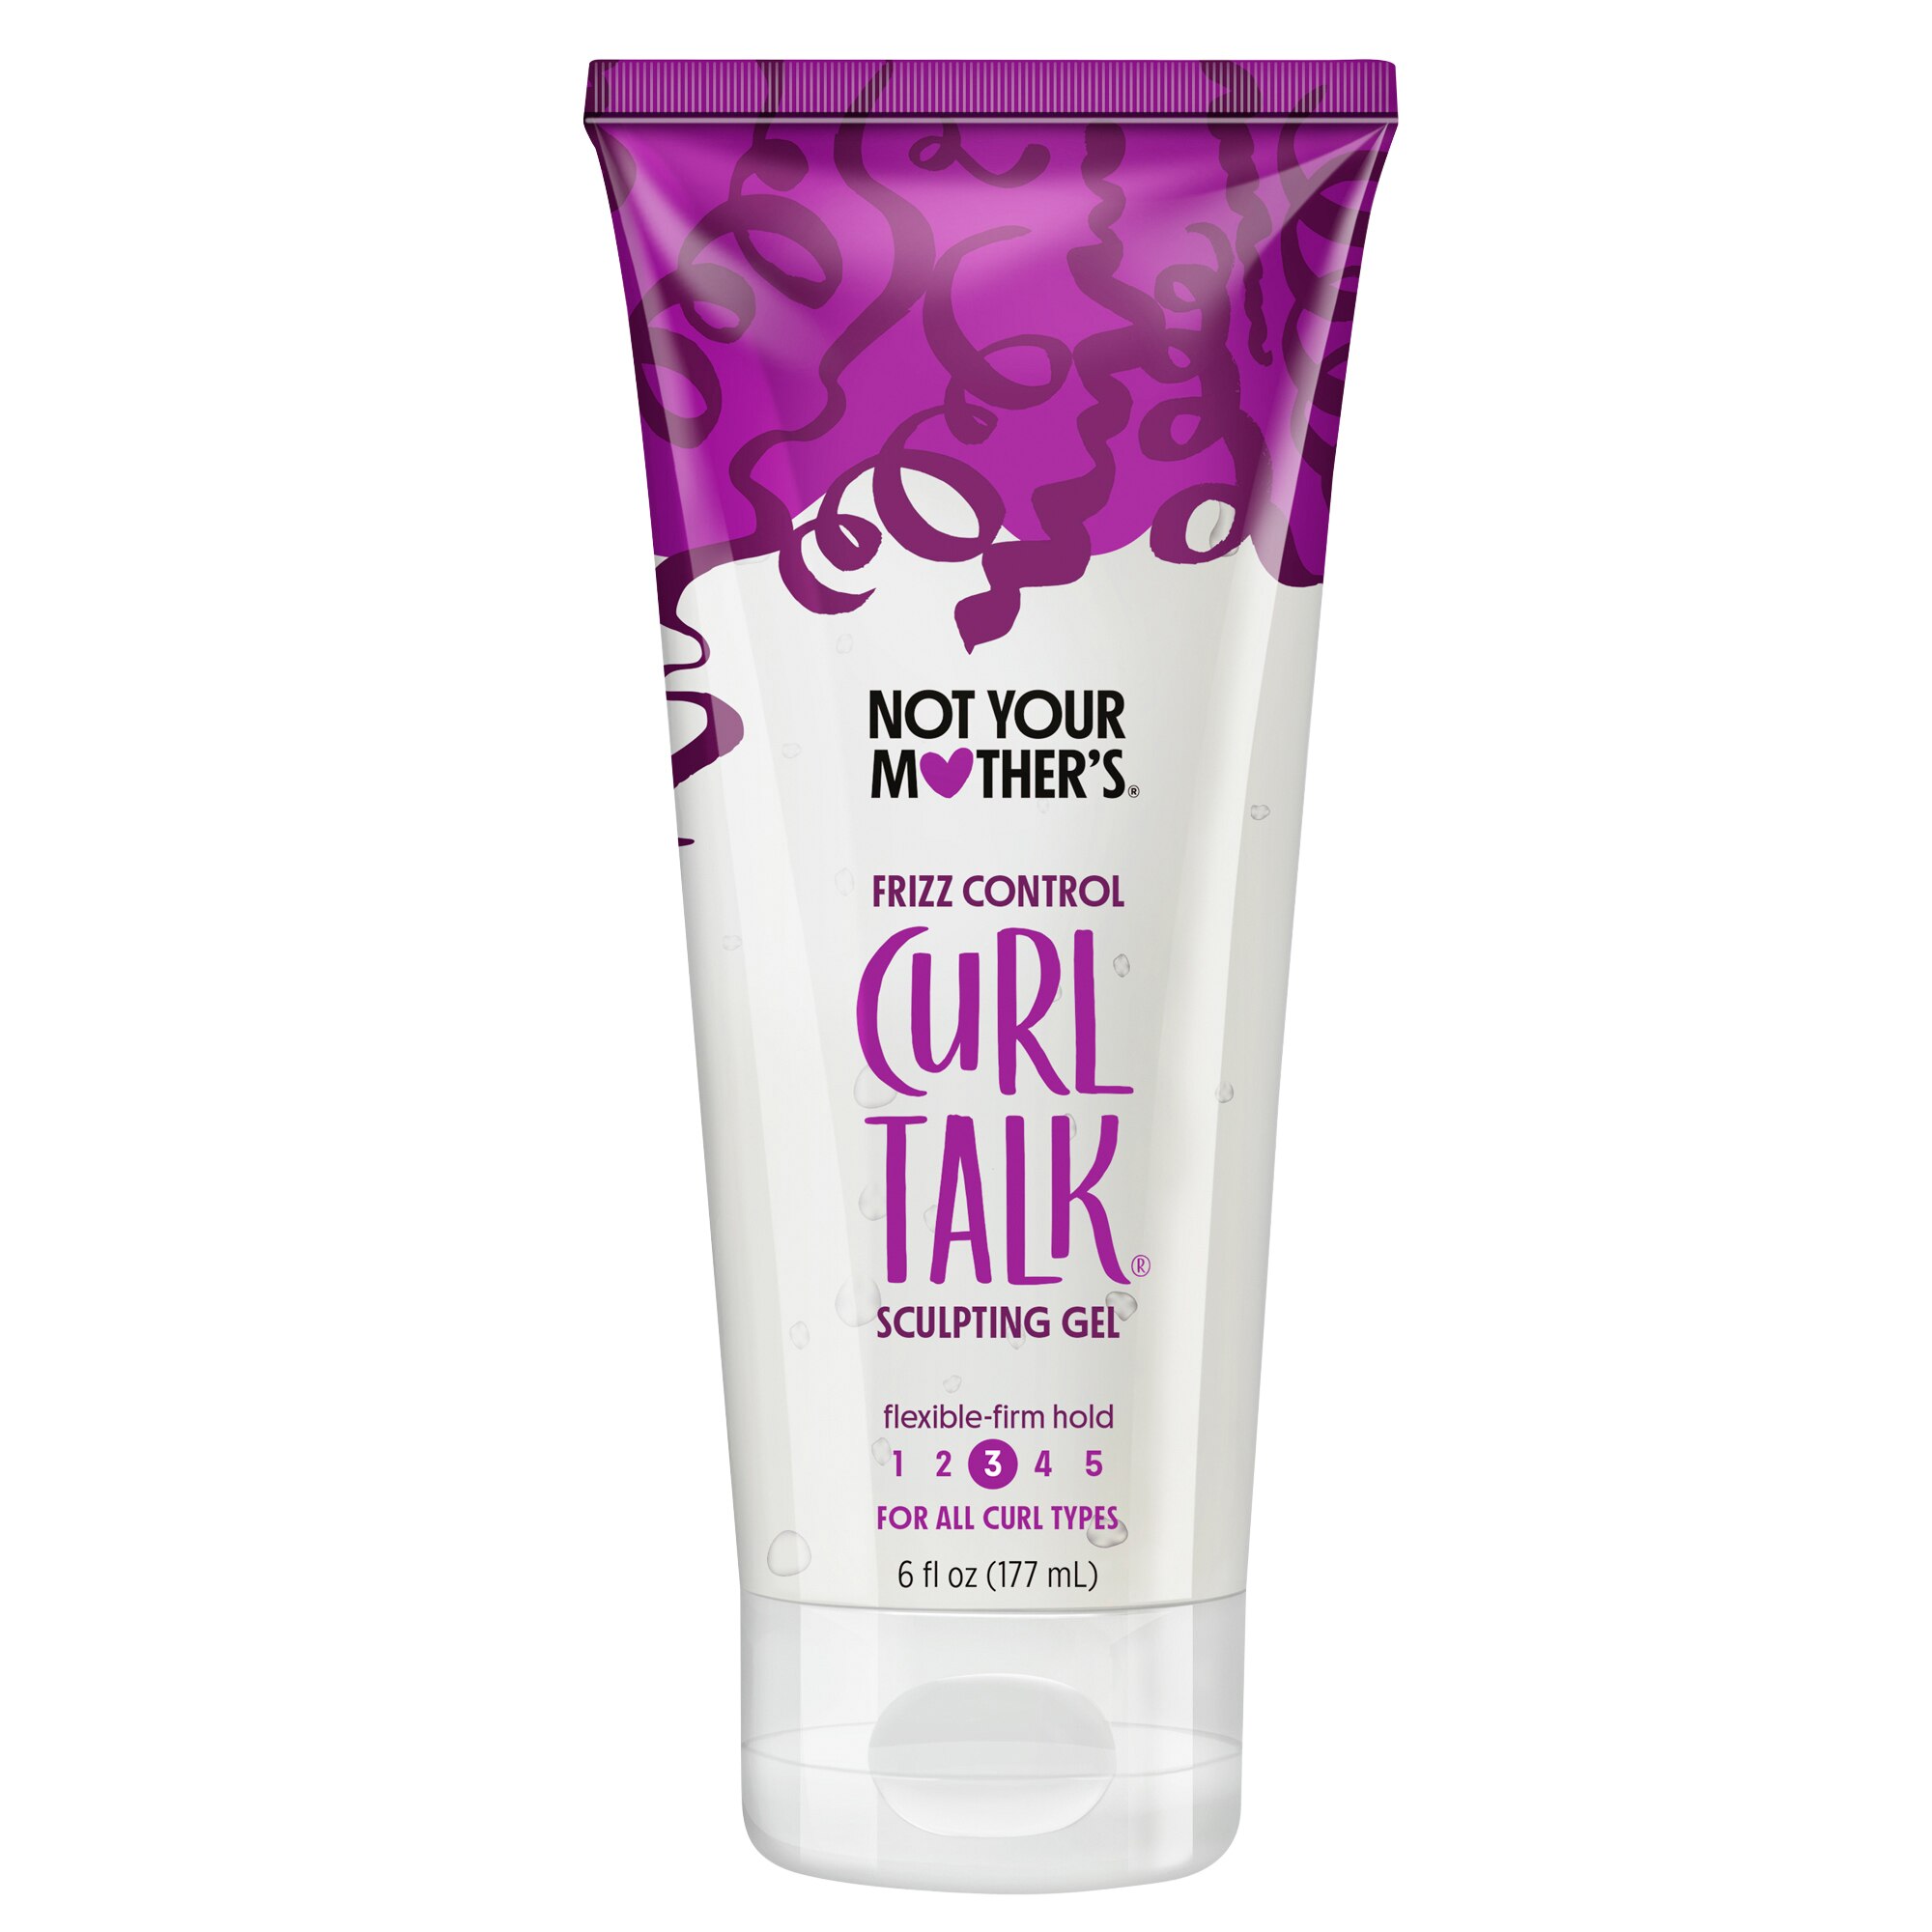 Not Your Mother's Curl Talk Frizz Control Sculpting Gel, 6 OZ